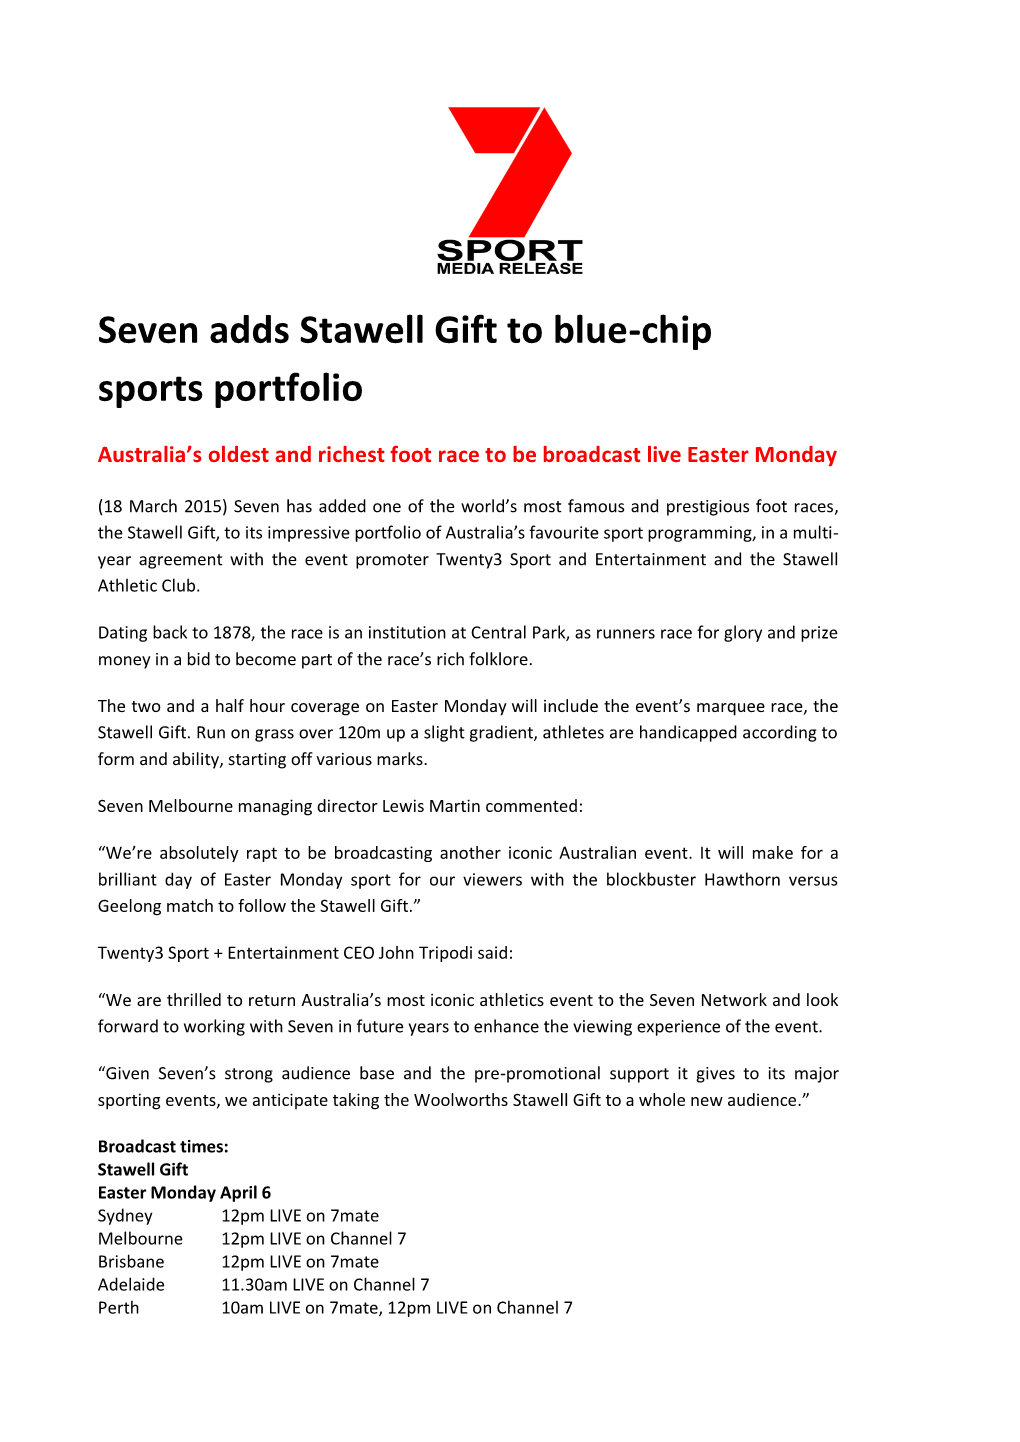 Seven Adds Stawell Gift to Blue-Chip Sports Portfolio